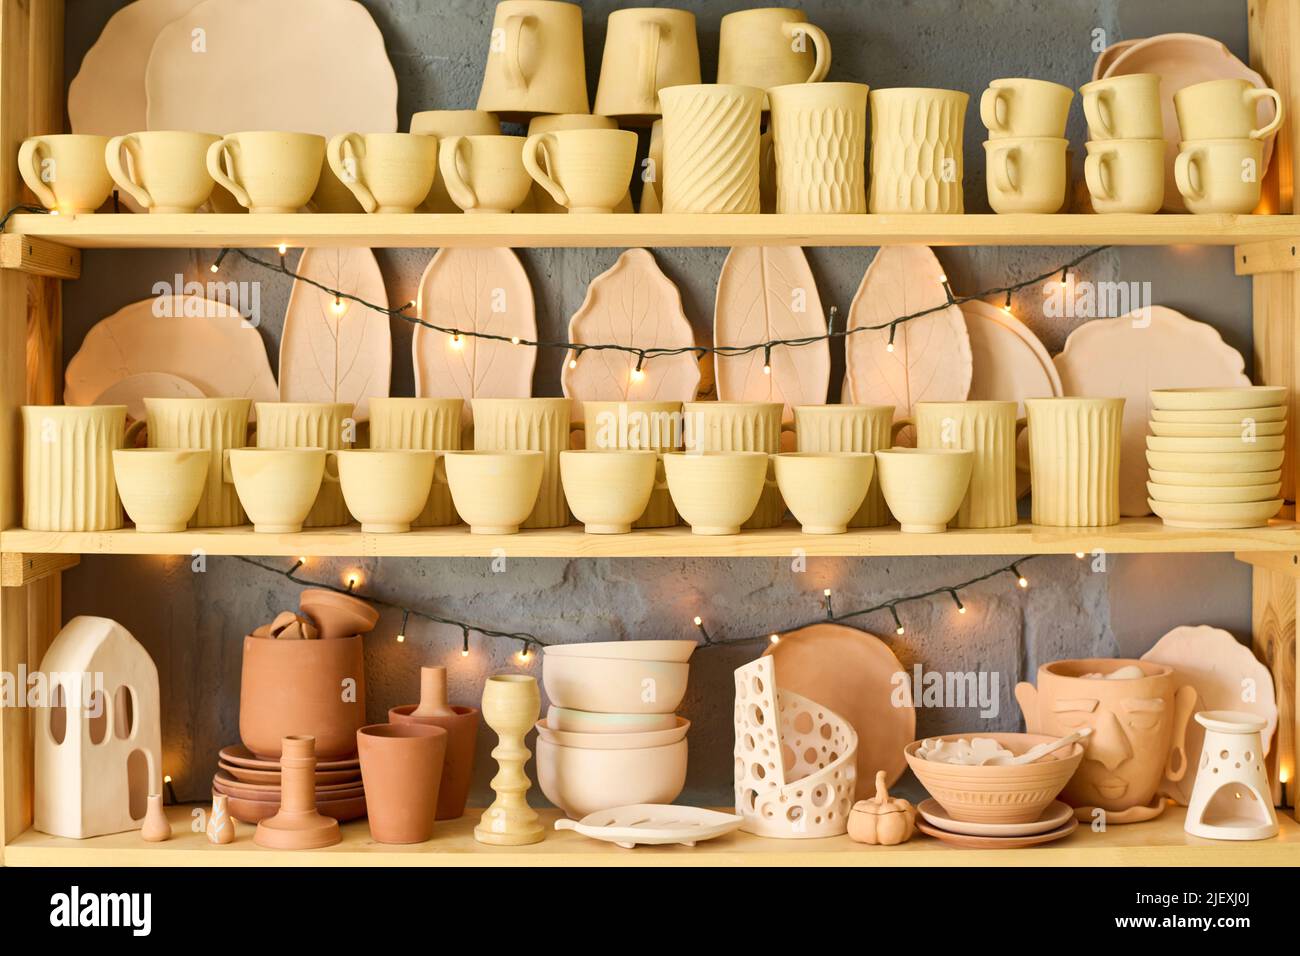 Large display with variety of handmade earthenware and clay items such as mugs, bowls, pots and plates for sale in small shop of handcraft Stock Photo